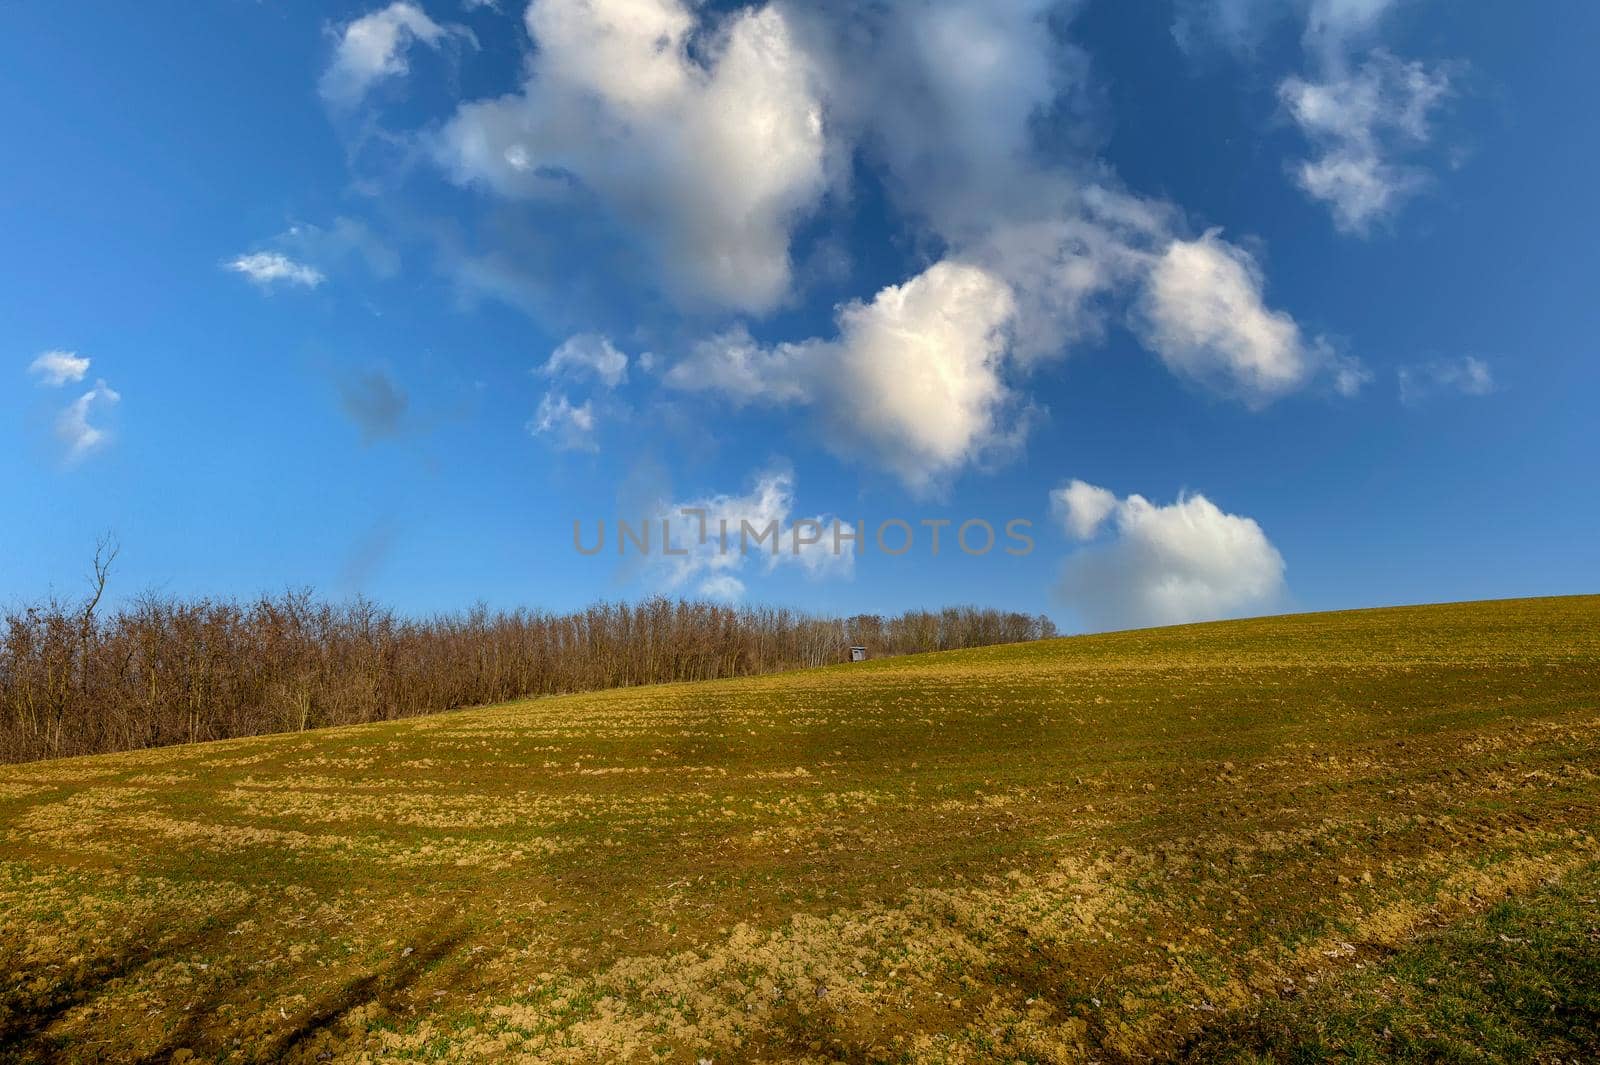 A dry field in the spring before sowing, with a hunter standing tall and a beautiful cloud formation.